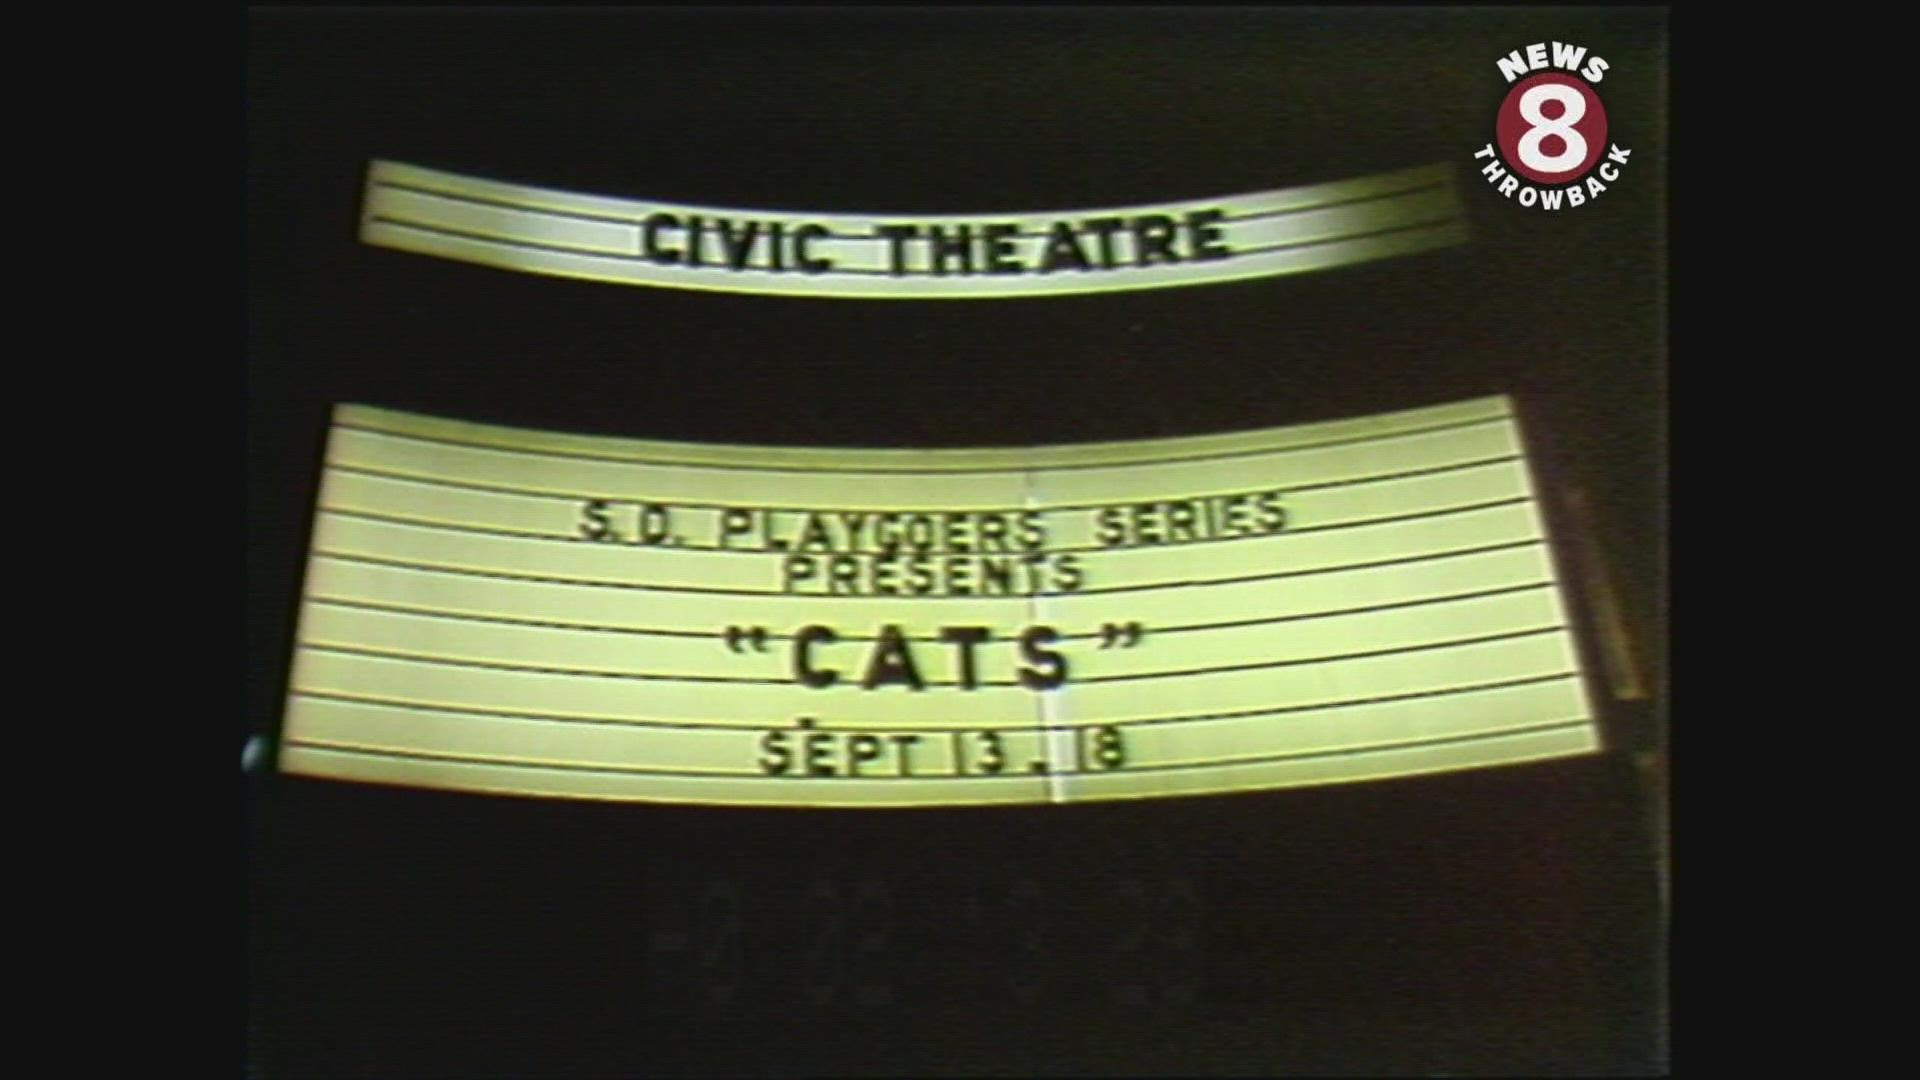 Behind the scenes of "Cats" at the Civic Theatre in 1988